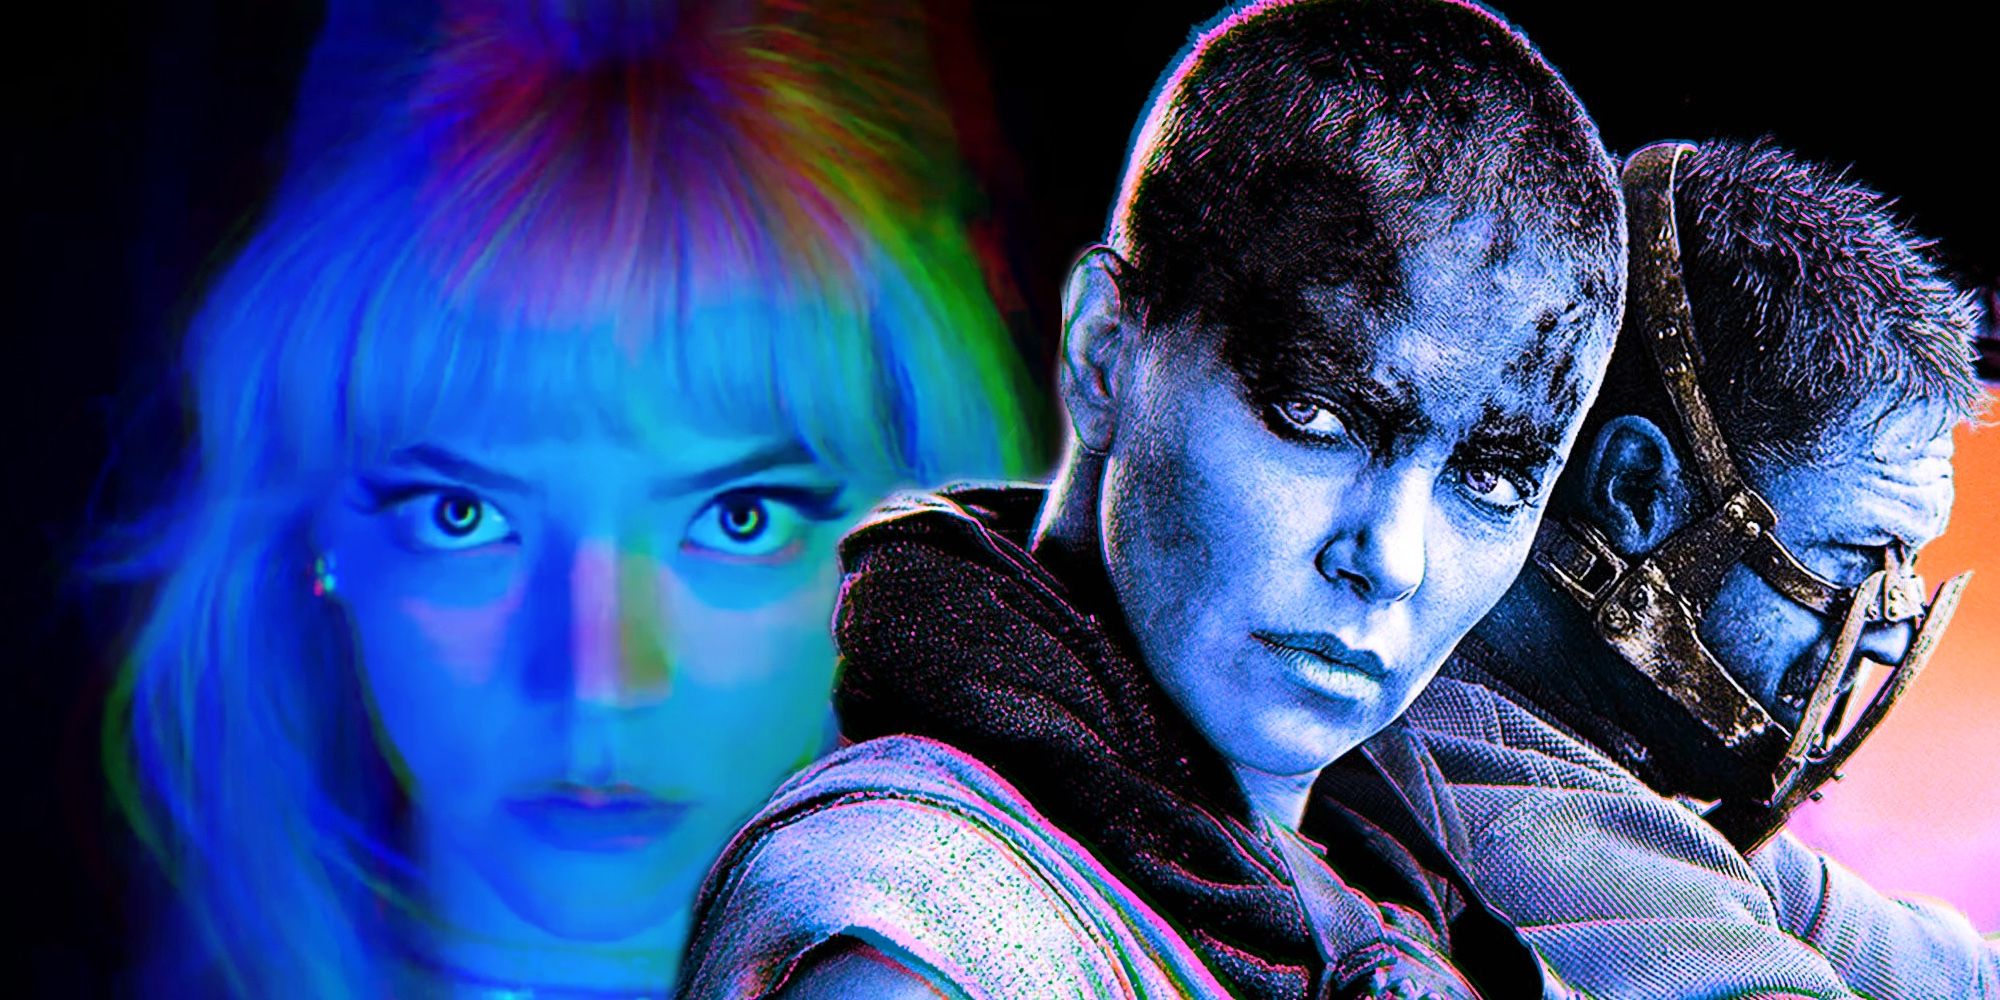 Mad Max: Furiosa’s Synopsis Points To Major Plot Problems